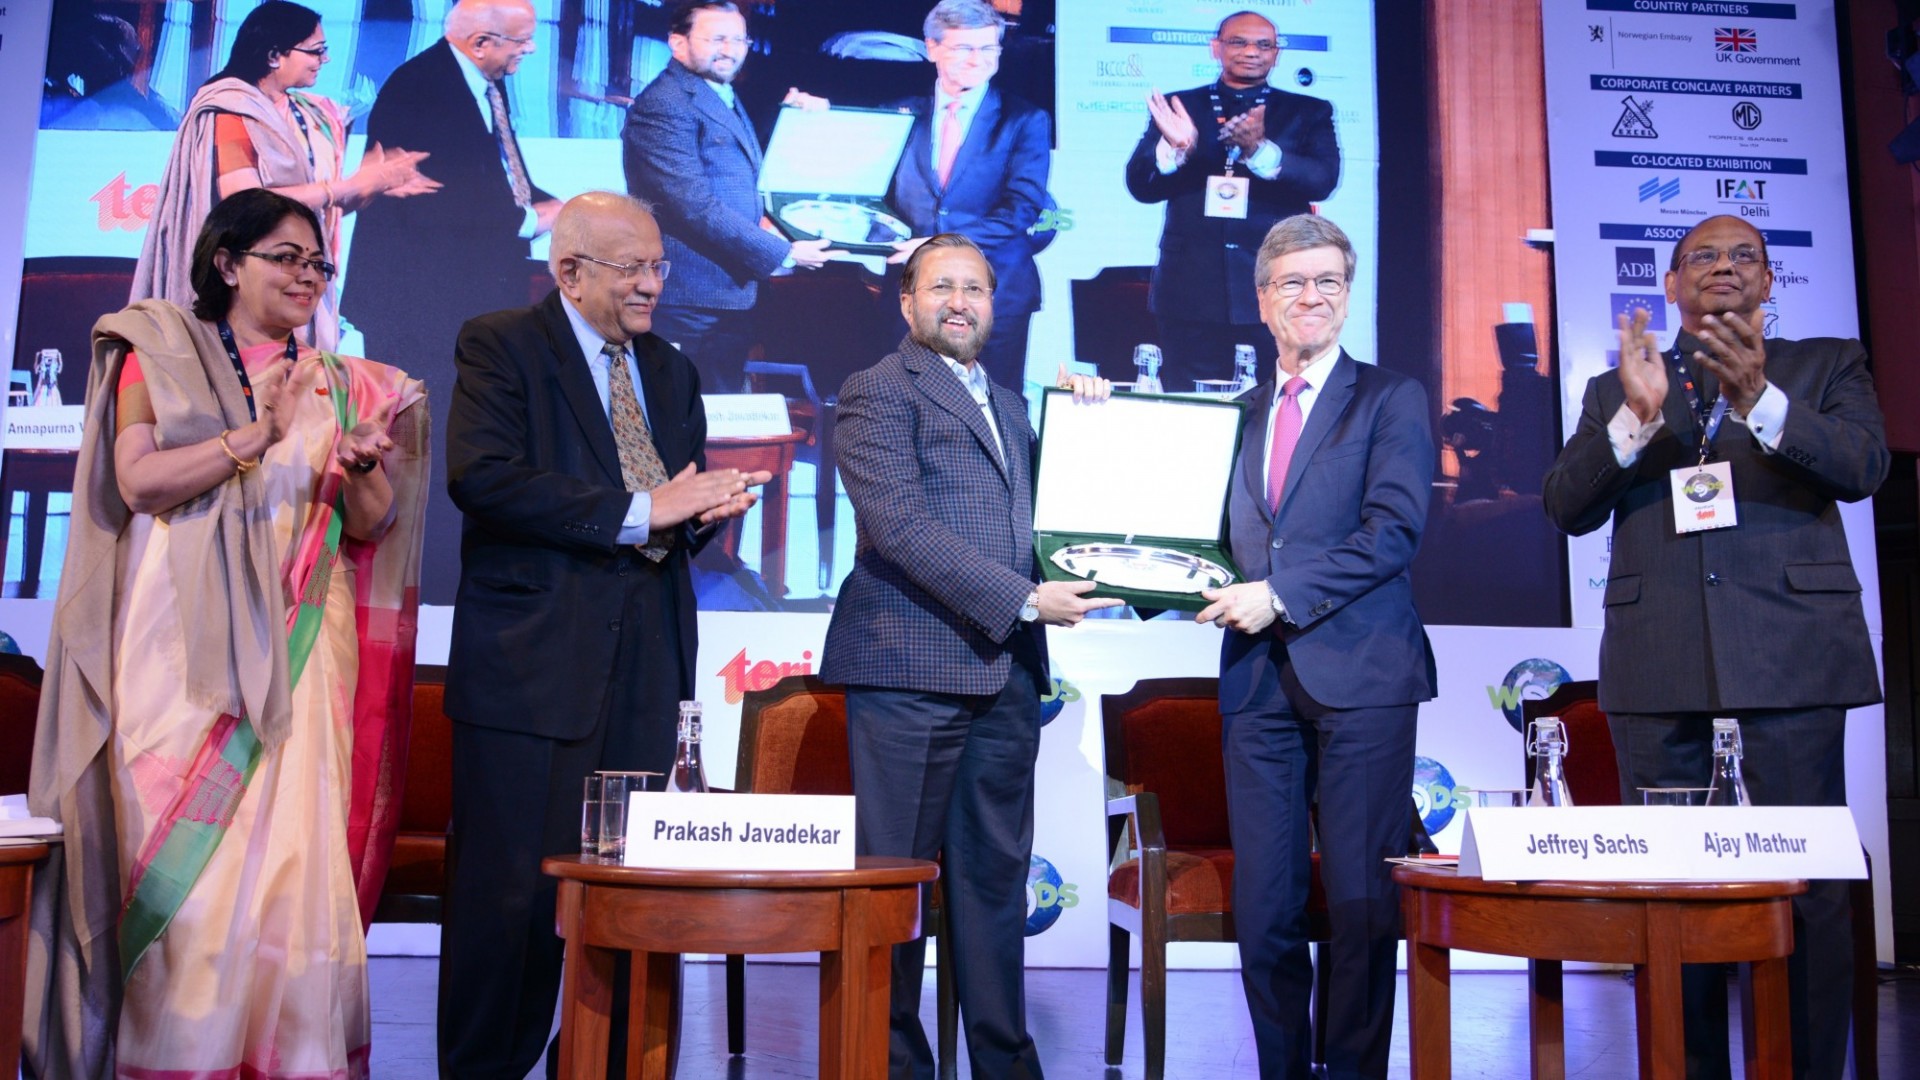 Jeffrey Sachs receives the Sustainable Development Leadership Award at The Energy and Resources Institute’s (TERI) World Sustainable Development Summit, India